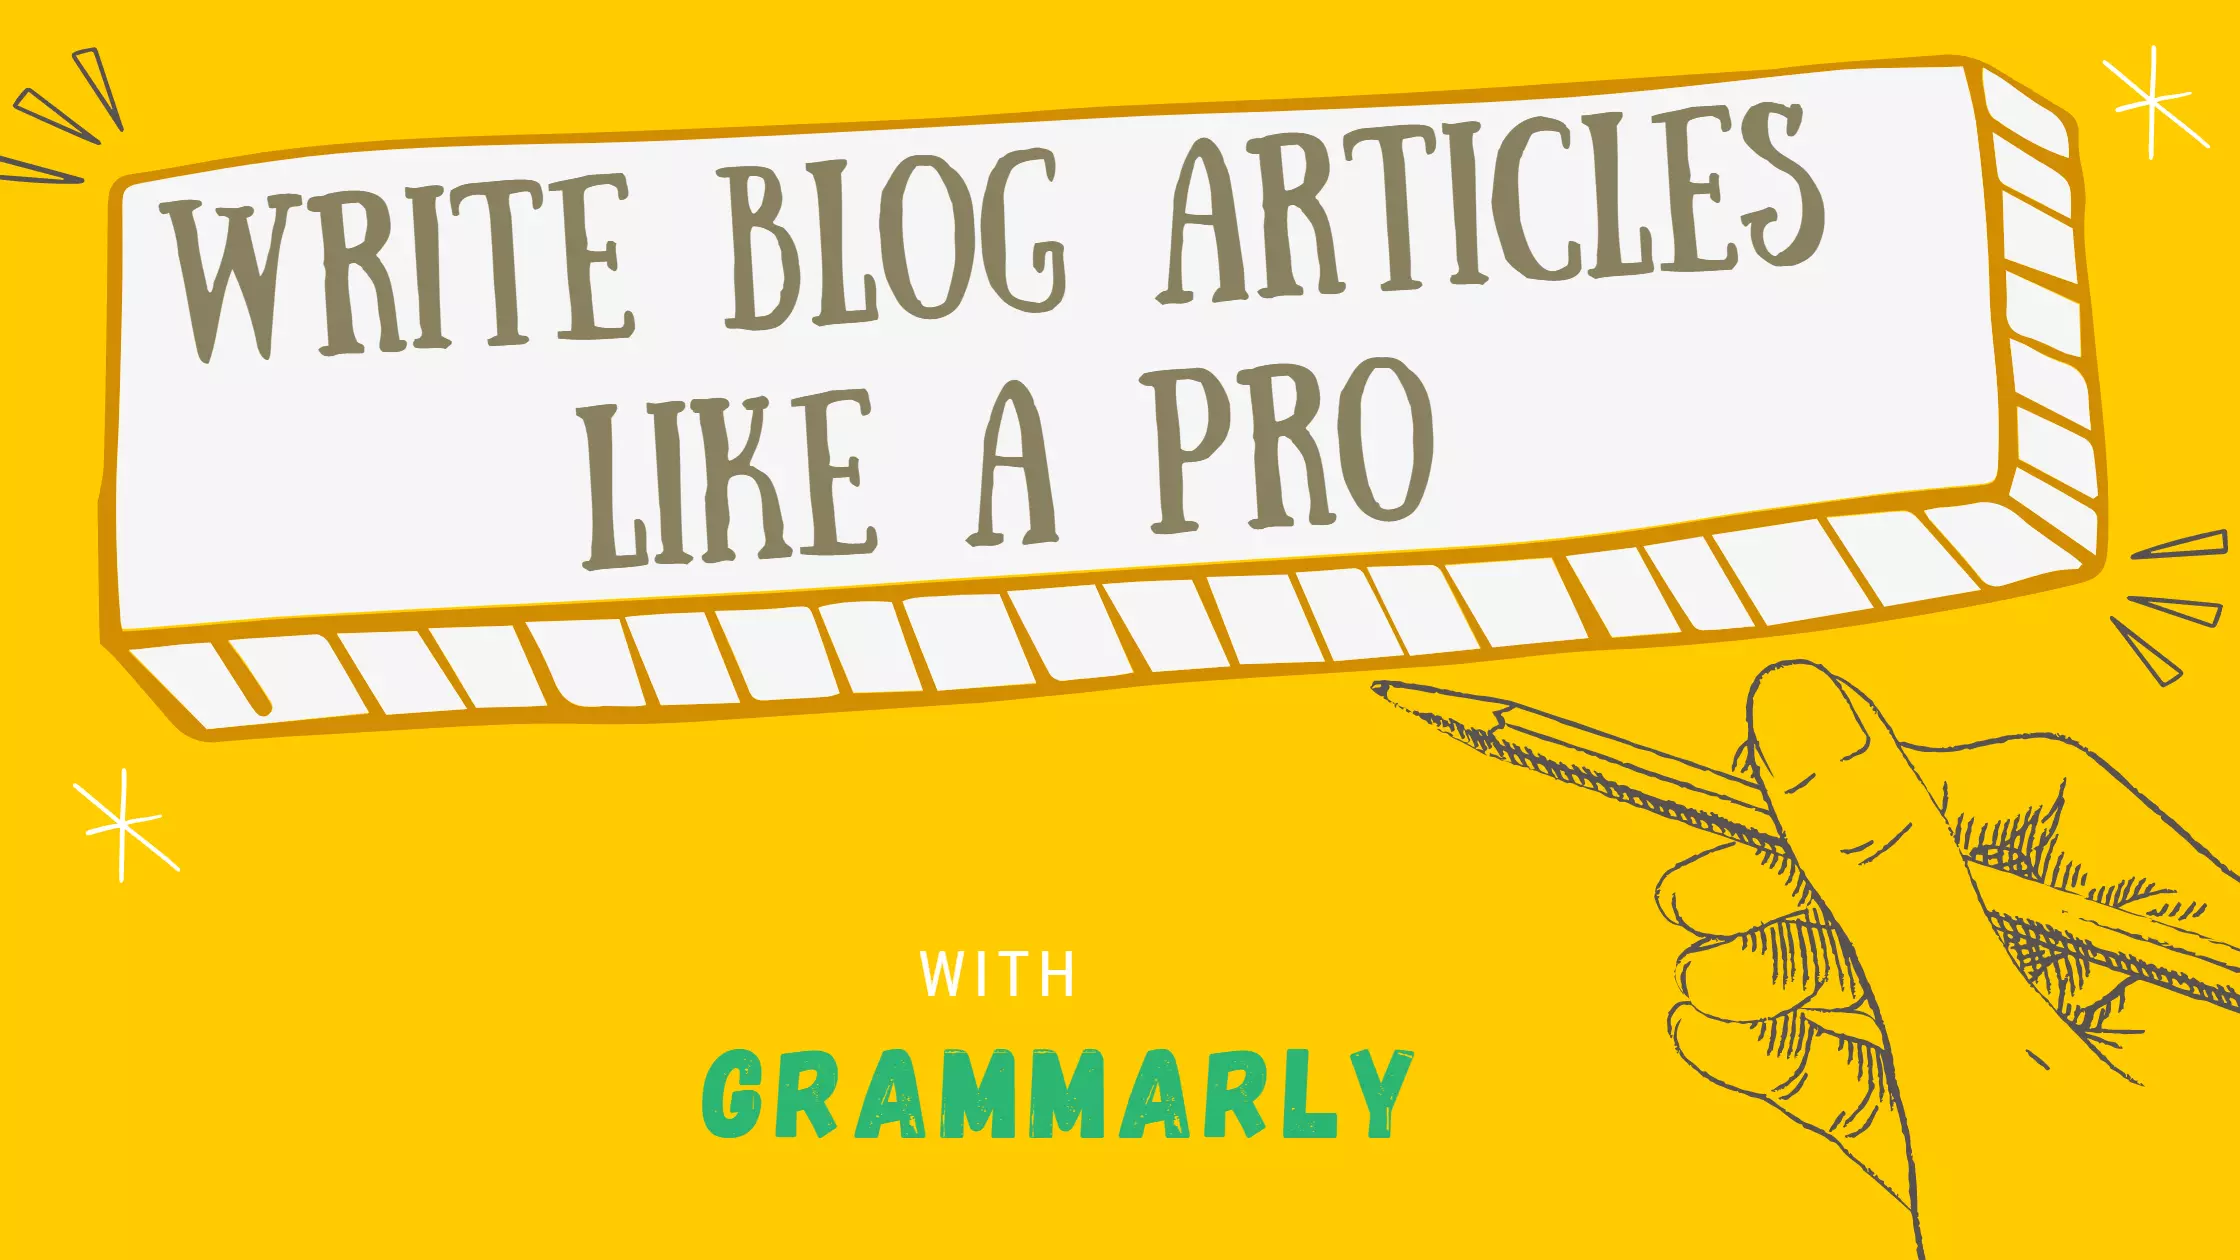 Learn How To Write Blog Articles Like a Pro